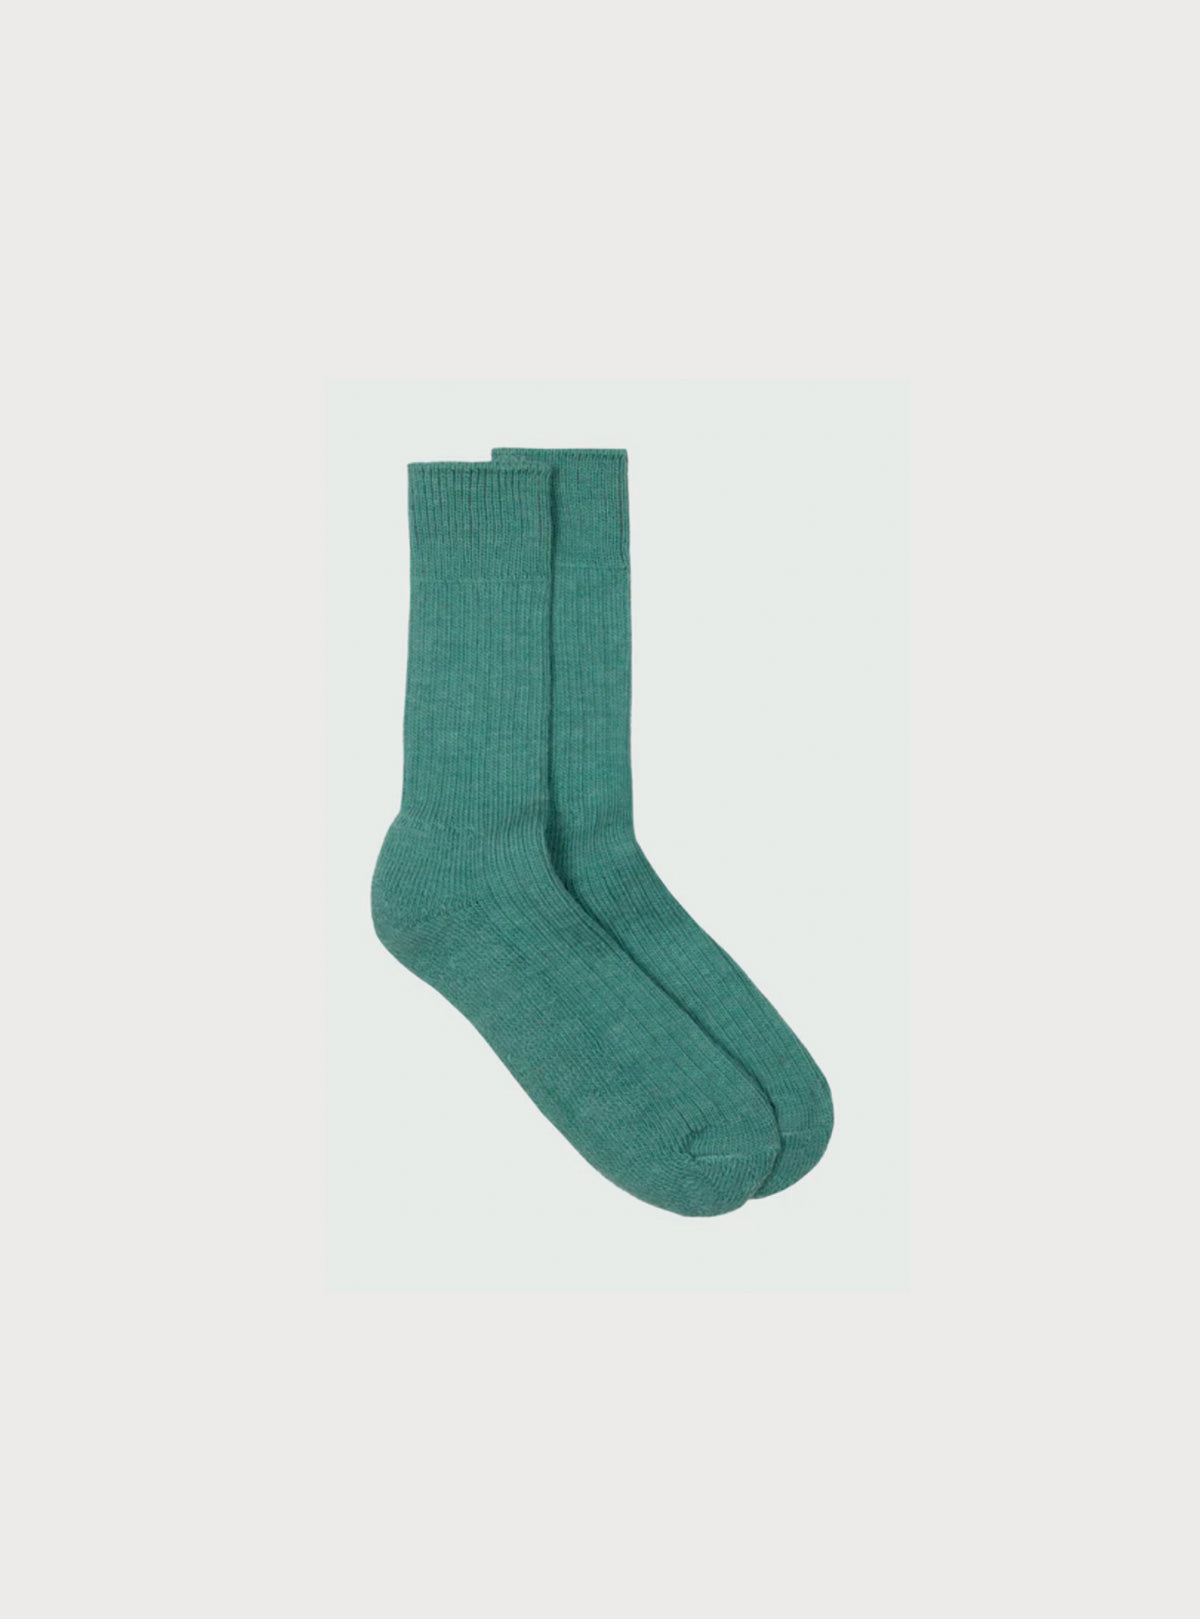 Finisterre - Ribbed Sock - Seaglass